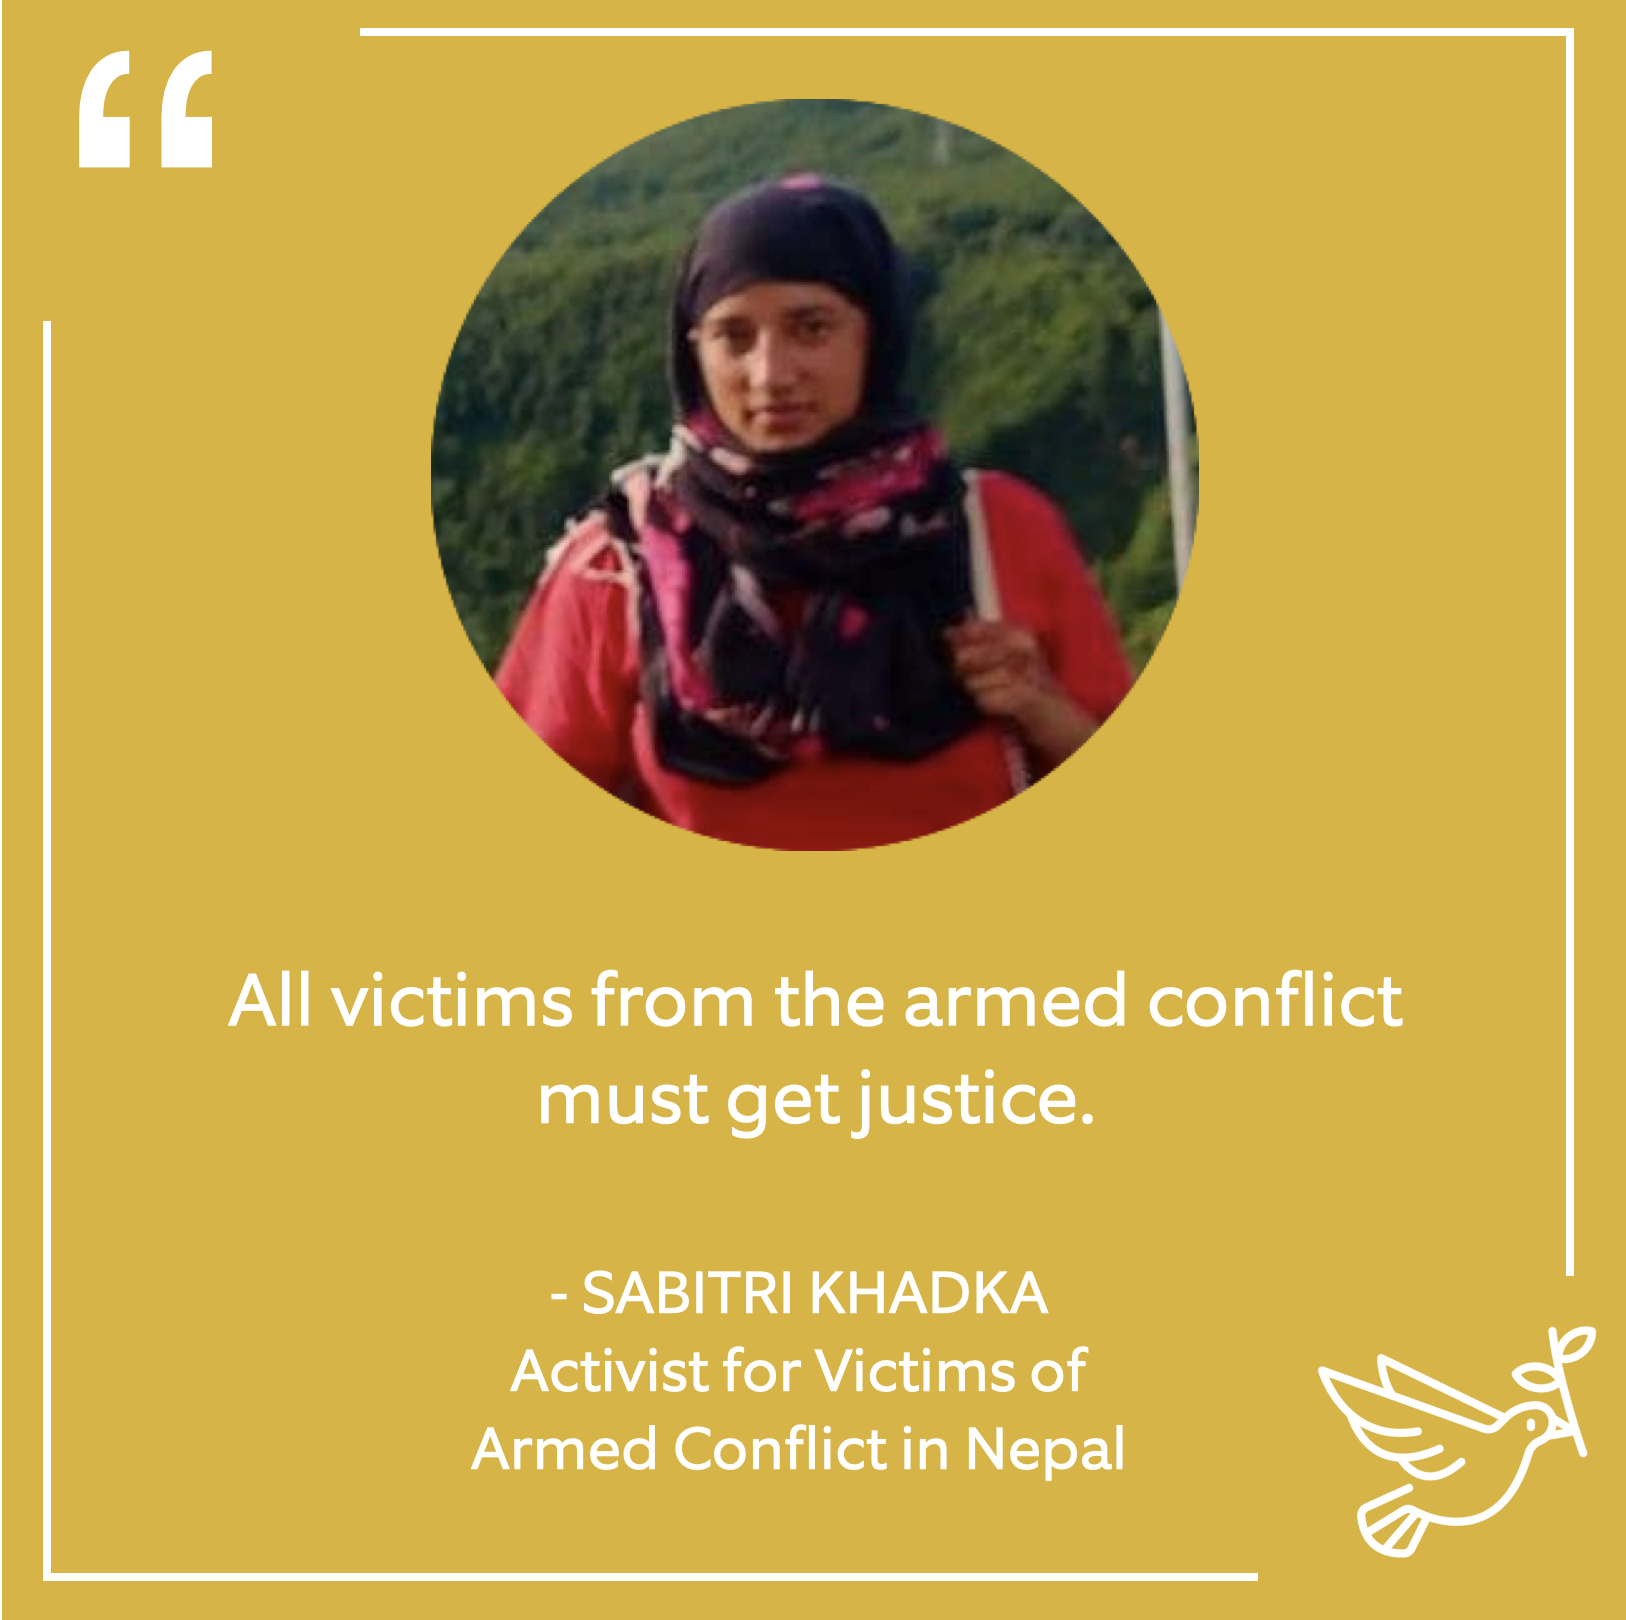 Sabitri Khadka - Activist for Victims of the Armed Conflict in Nepal 